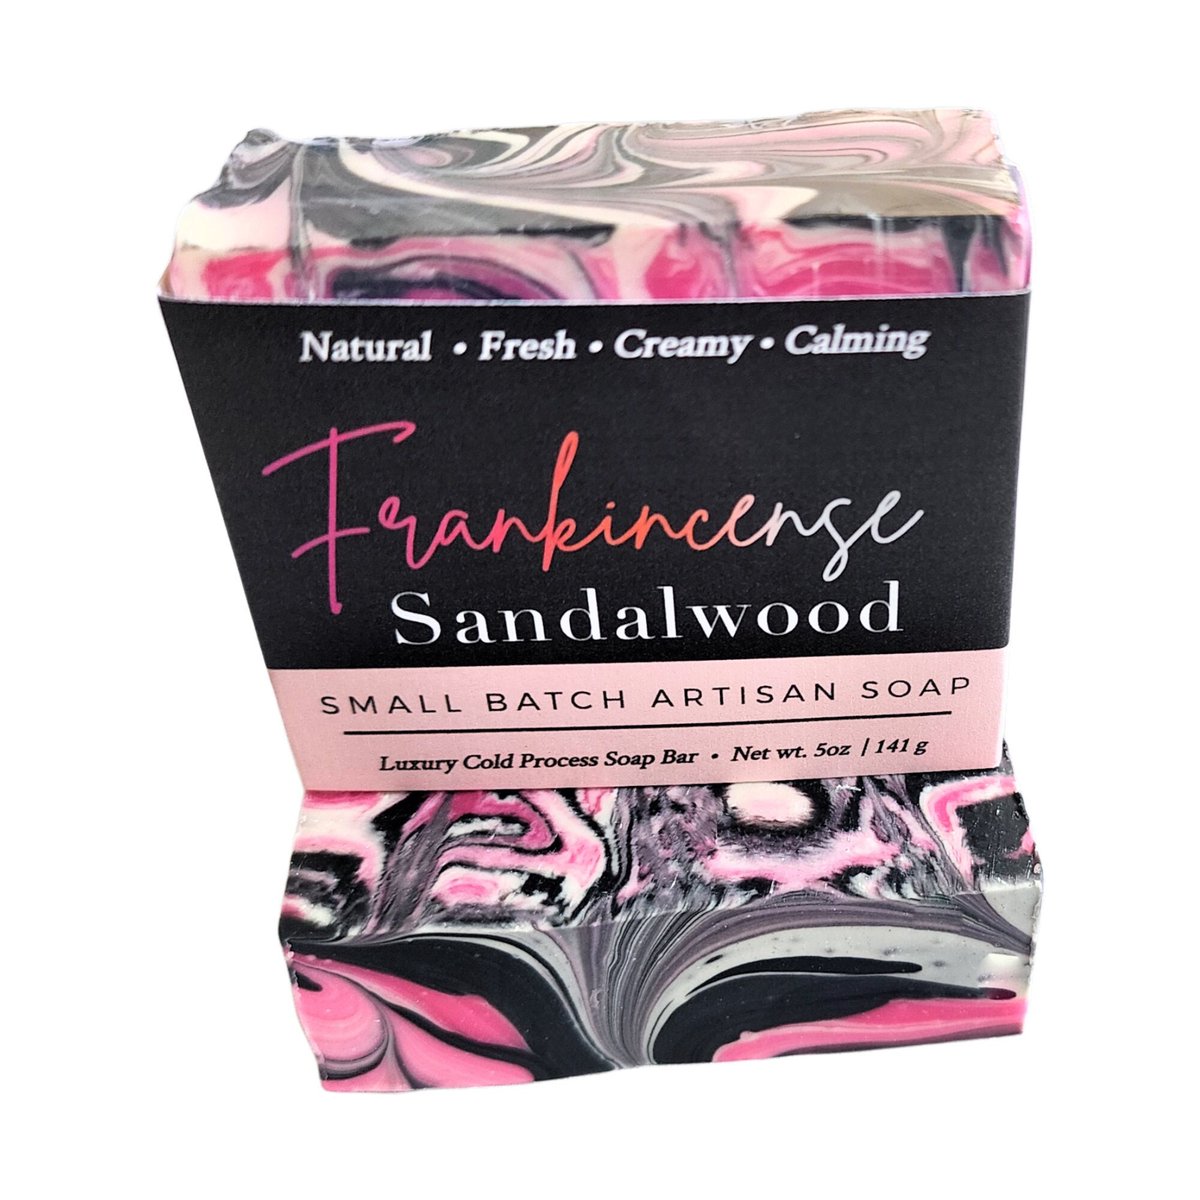 Frankincense Soap, Sandalwood Soap, Frankincense Sandalwood Soap, Pink Soap, Vegan Soap, Natural Soap, Soap Gift, Charcoal Soap, Best Seller tuppu.net/7b4d44a3 #vegan #shopsmall #DeShawnMarie #handmadesoap #Christmasgifts #Etsy #gifts #NaturalSoap